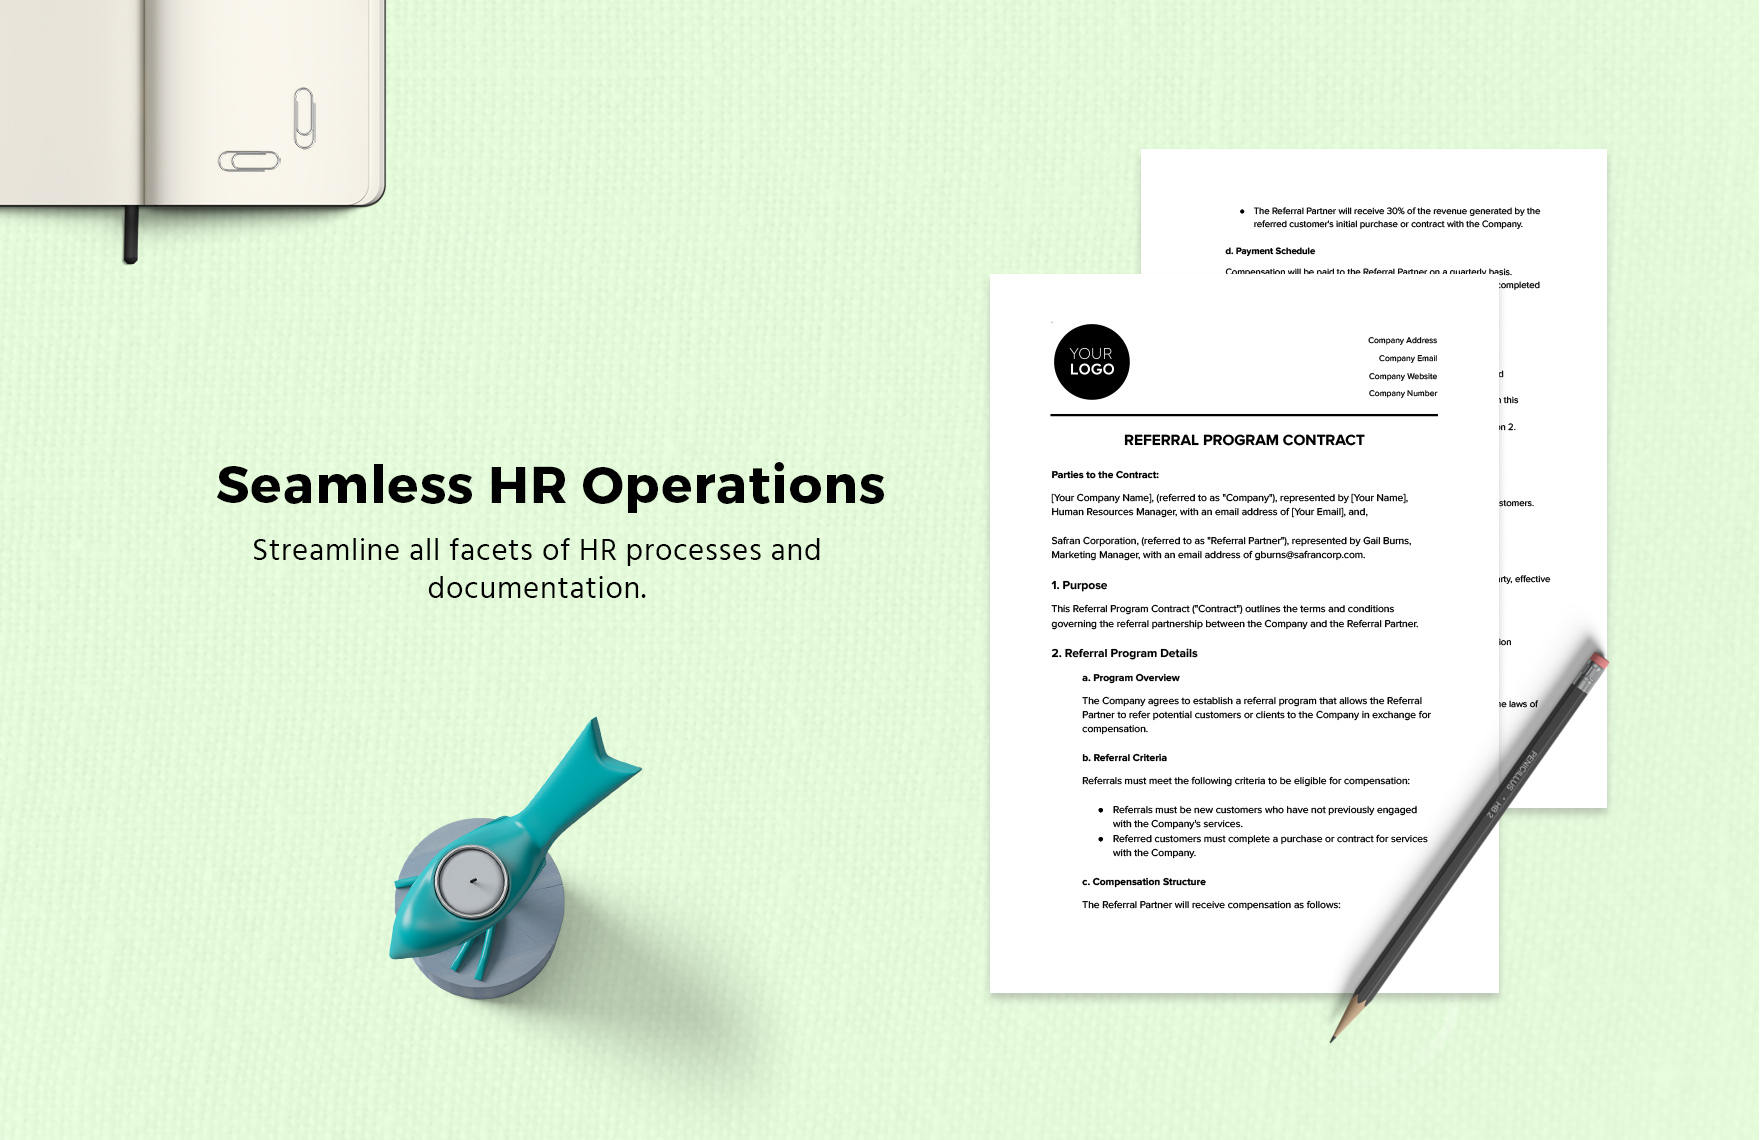 Referral Program Contract HR Template